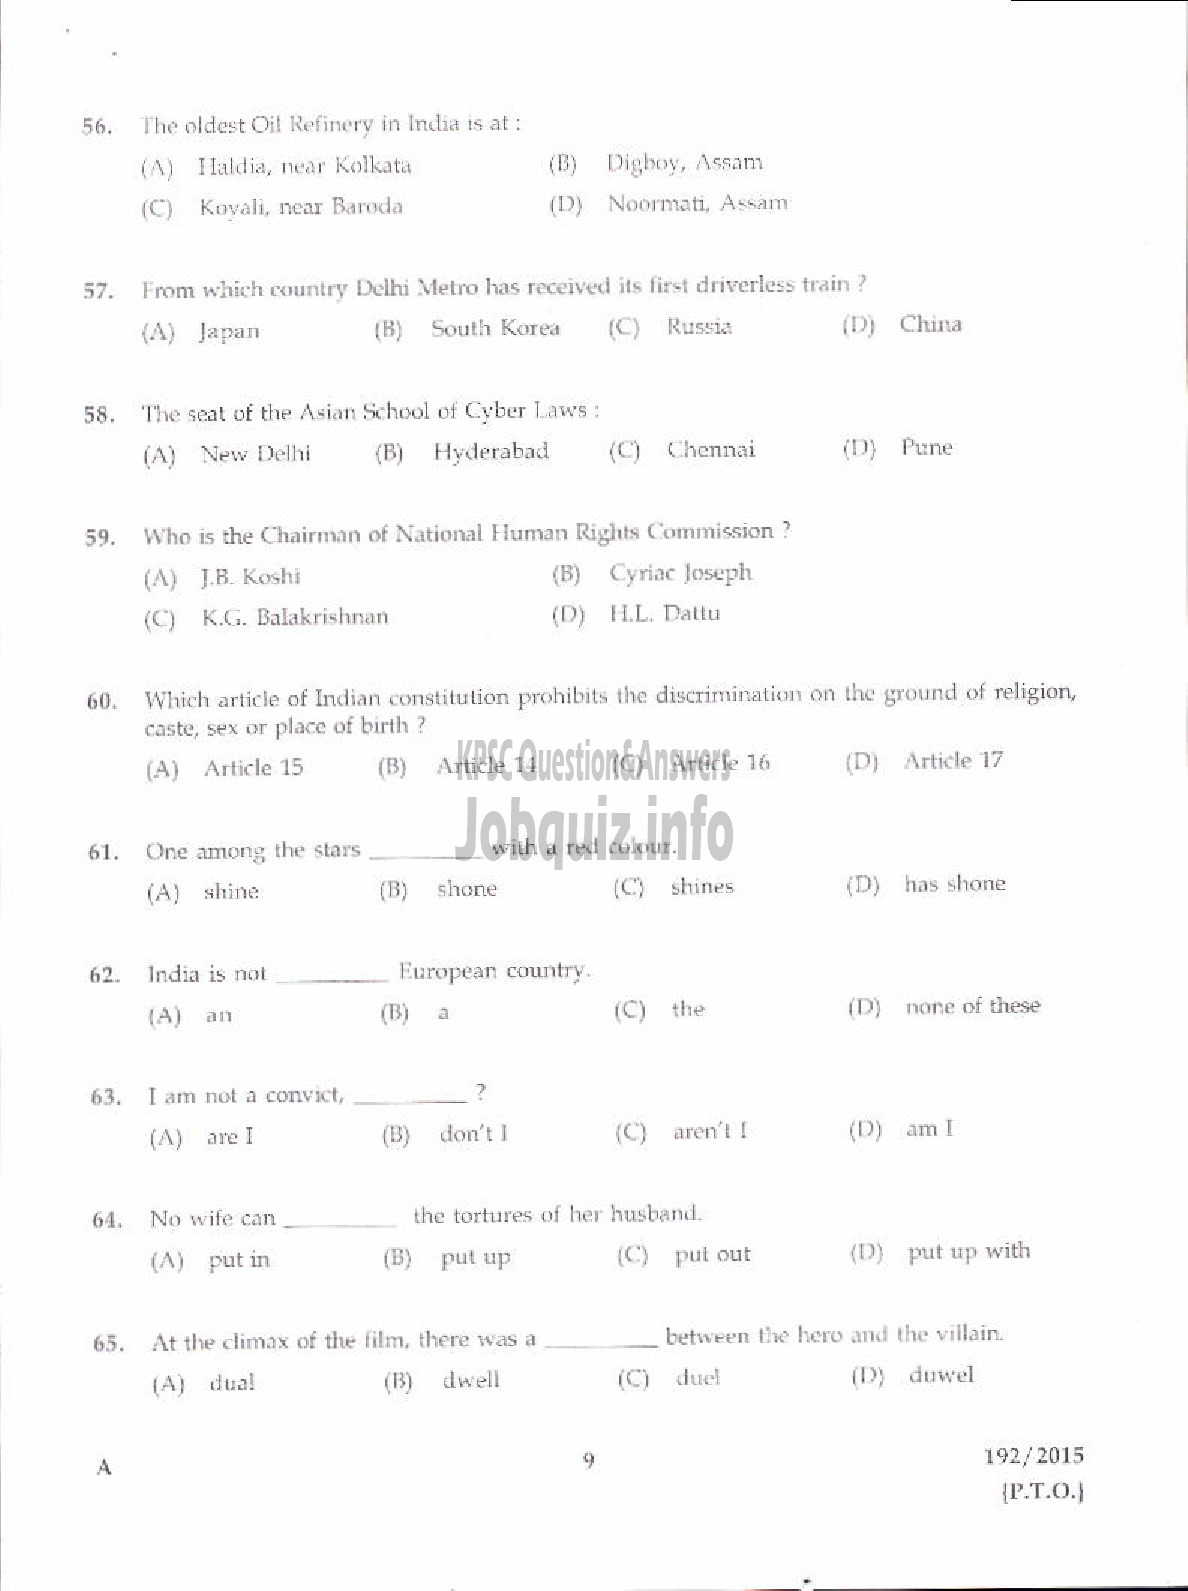 Kerala PSC Question Paper - FIREMAN TRAINEE FIRE AND RESCUE SERVICES-7